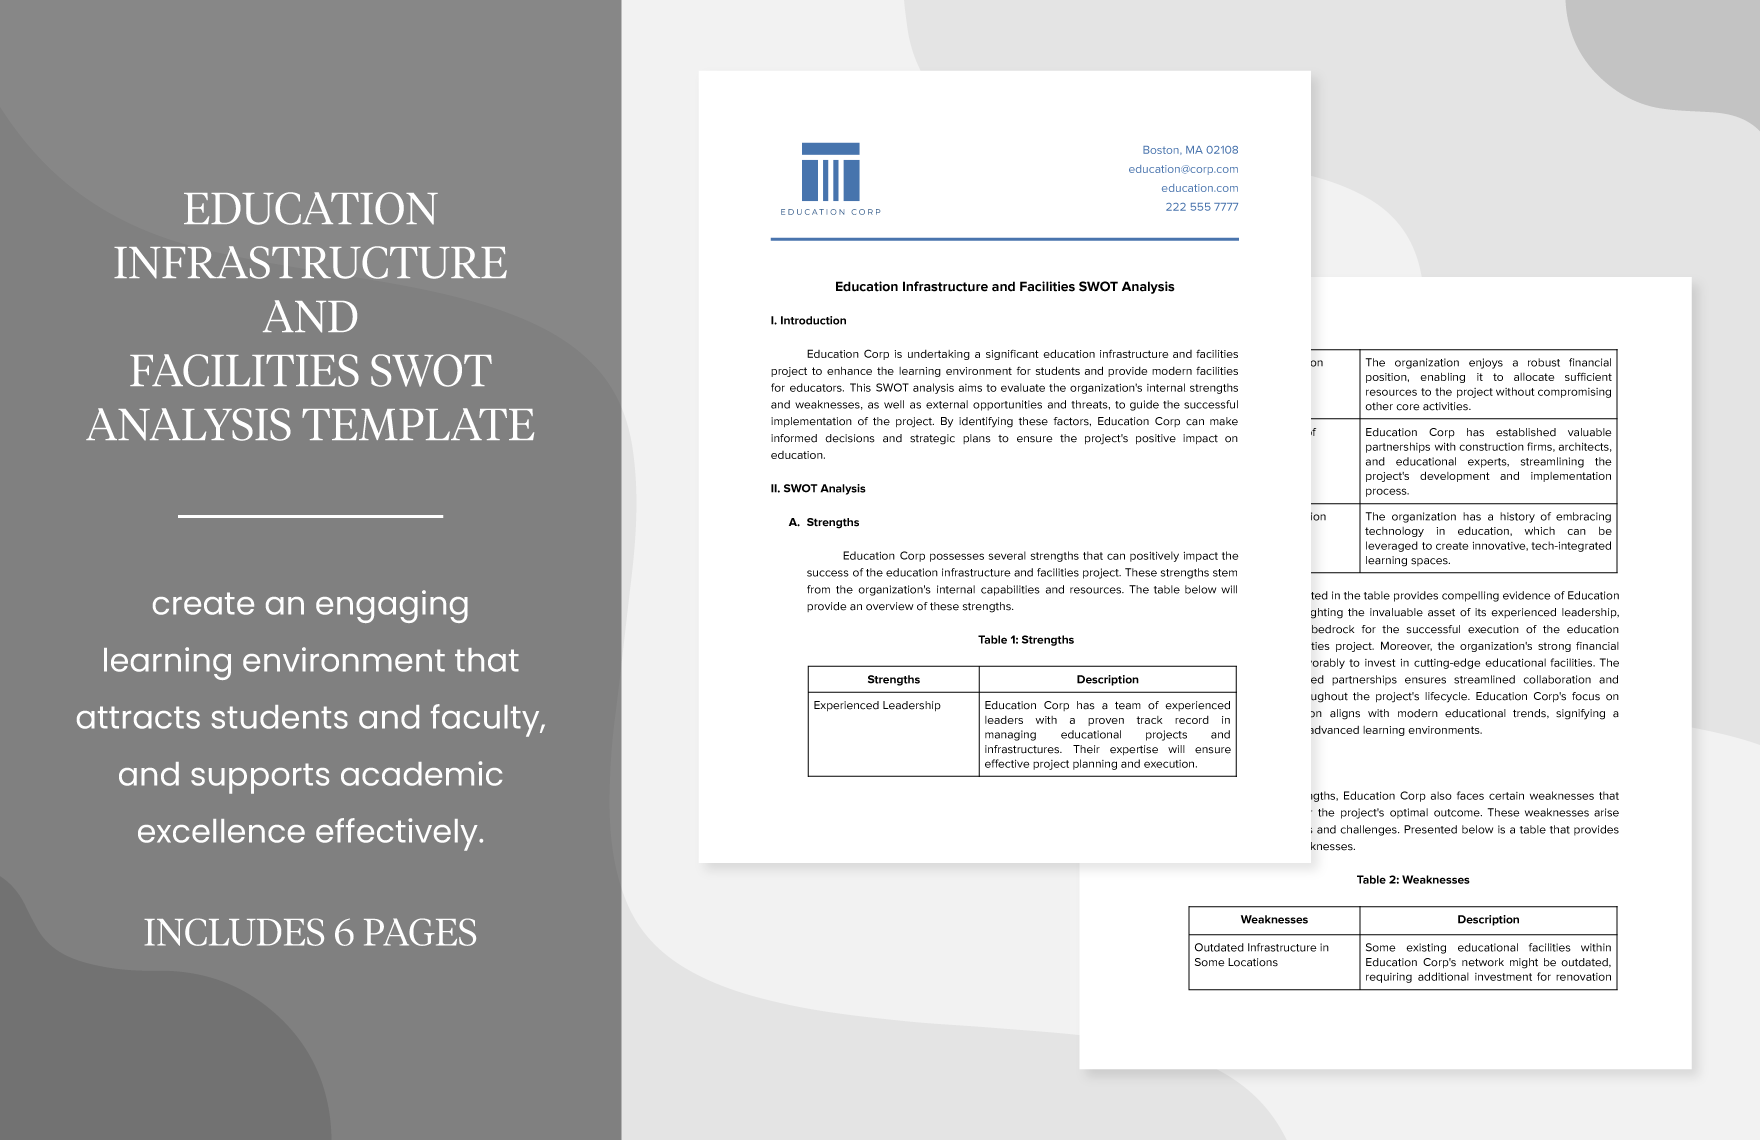 Education Infrastructure and Facilities SWOT Analysis Template